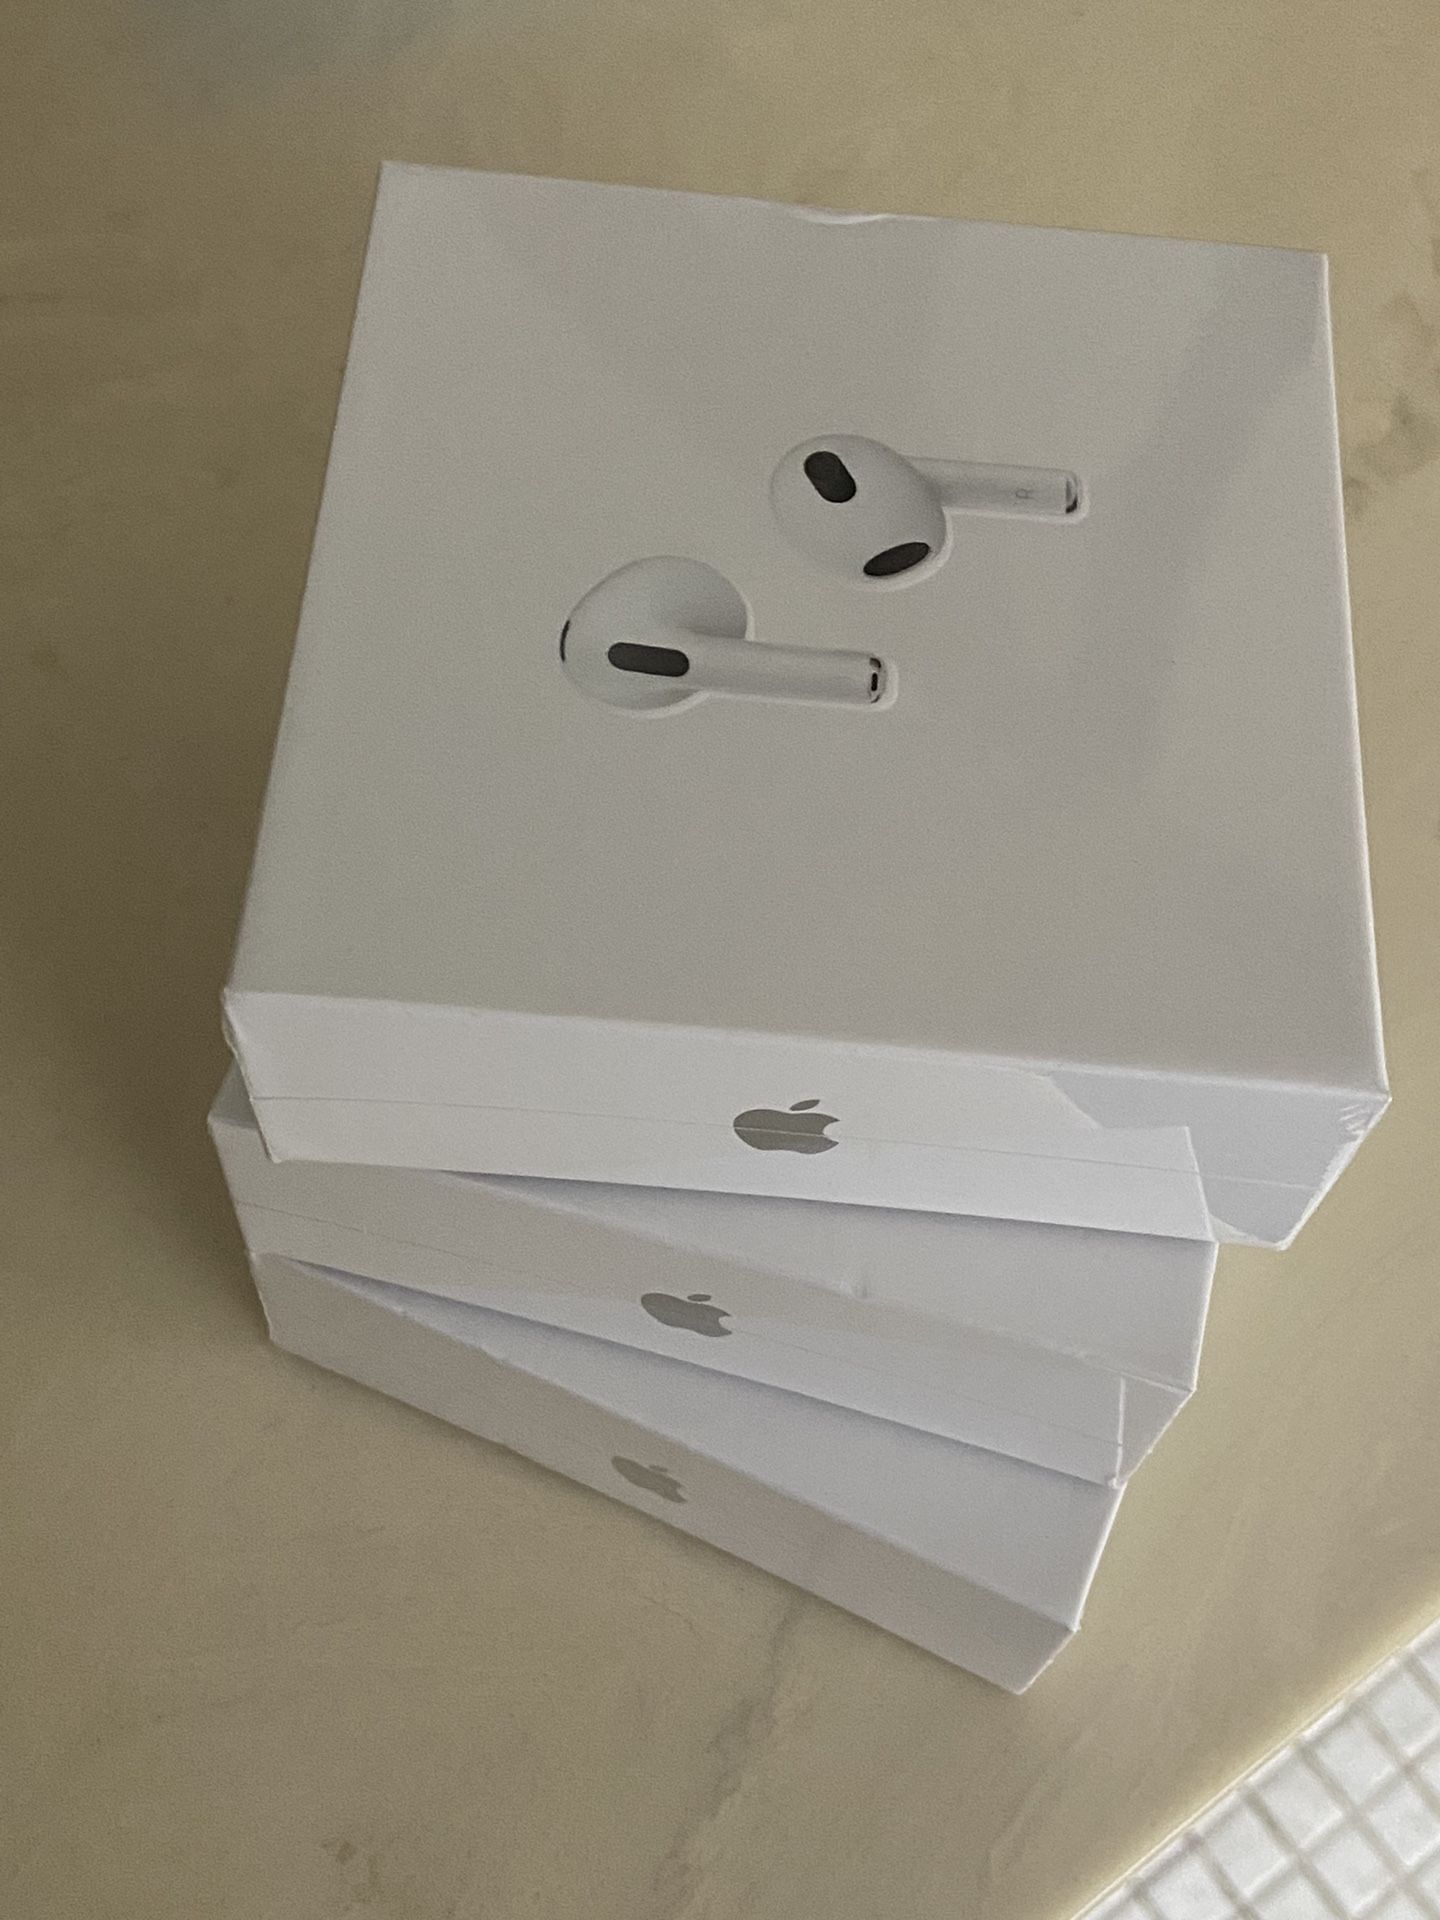 *Send Best Offer* Apple AirPods 3rd Generation (Brand New)